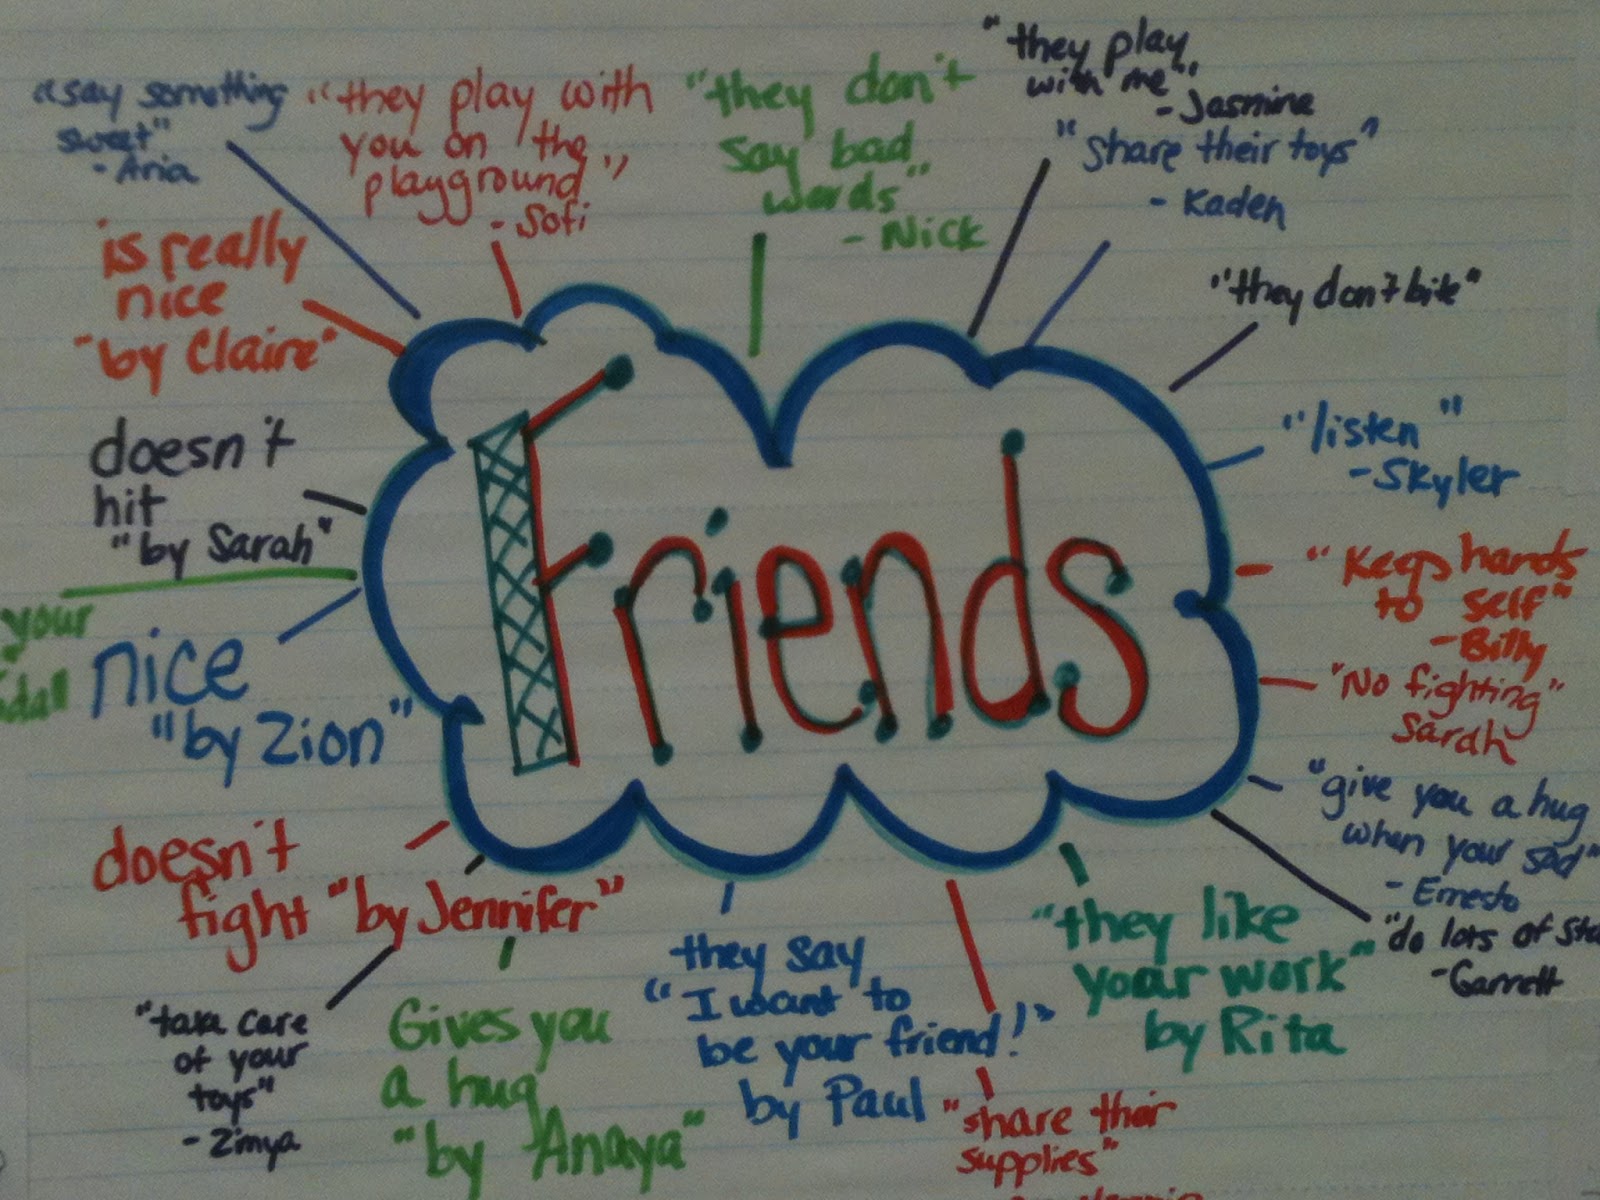 How to Write an Essay About Friends (Friendships)